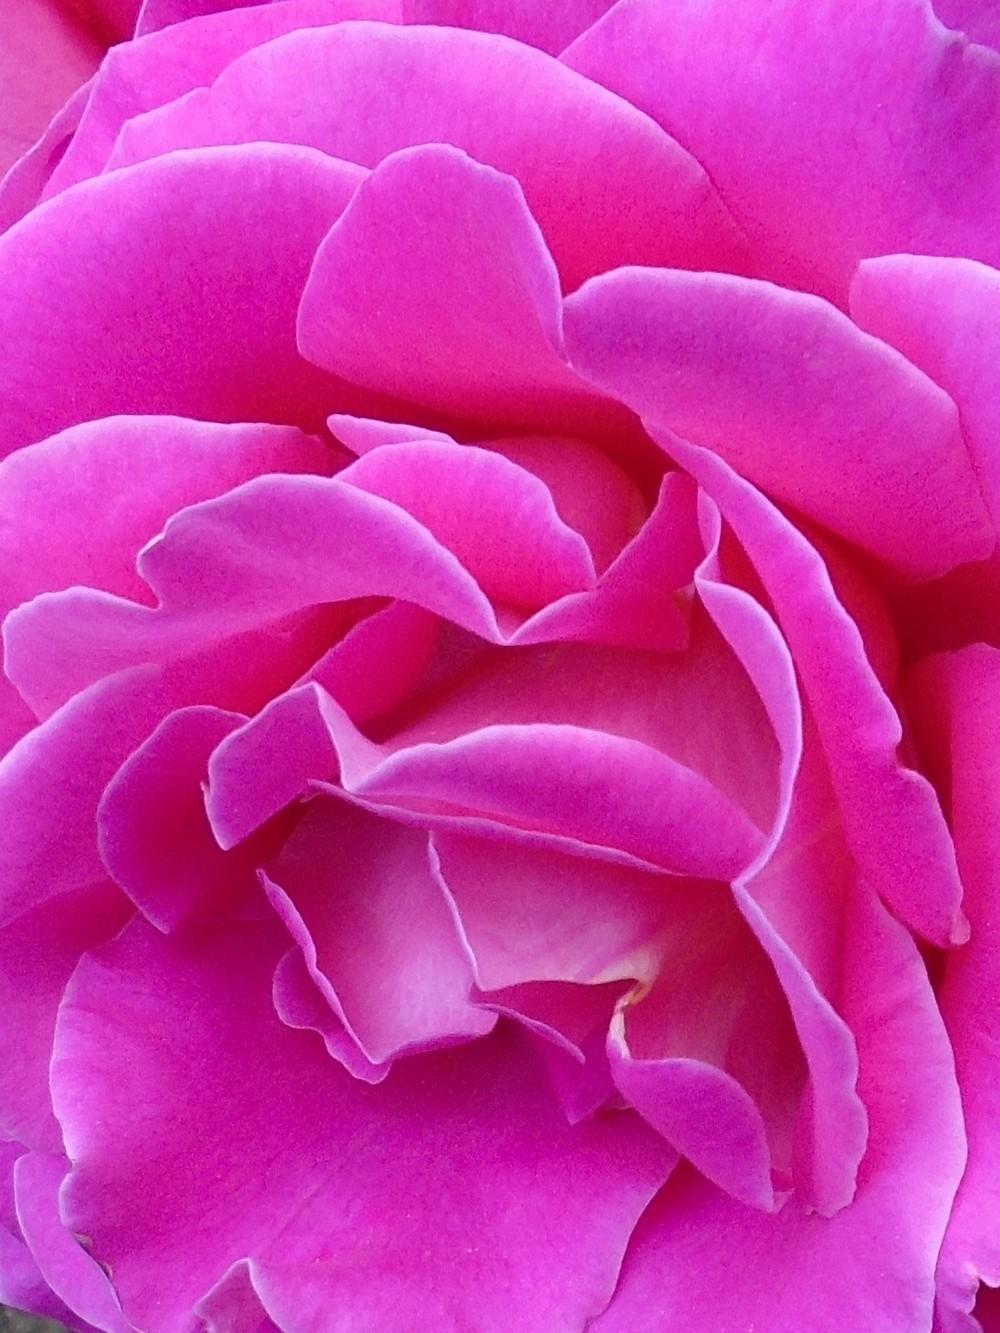 Photo of Rose (Rosa 'Pink Peace') uploaded by Paul2032